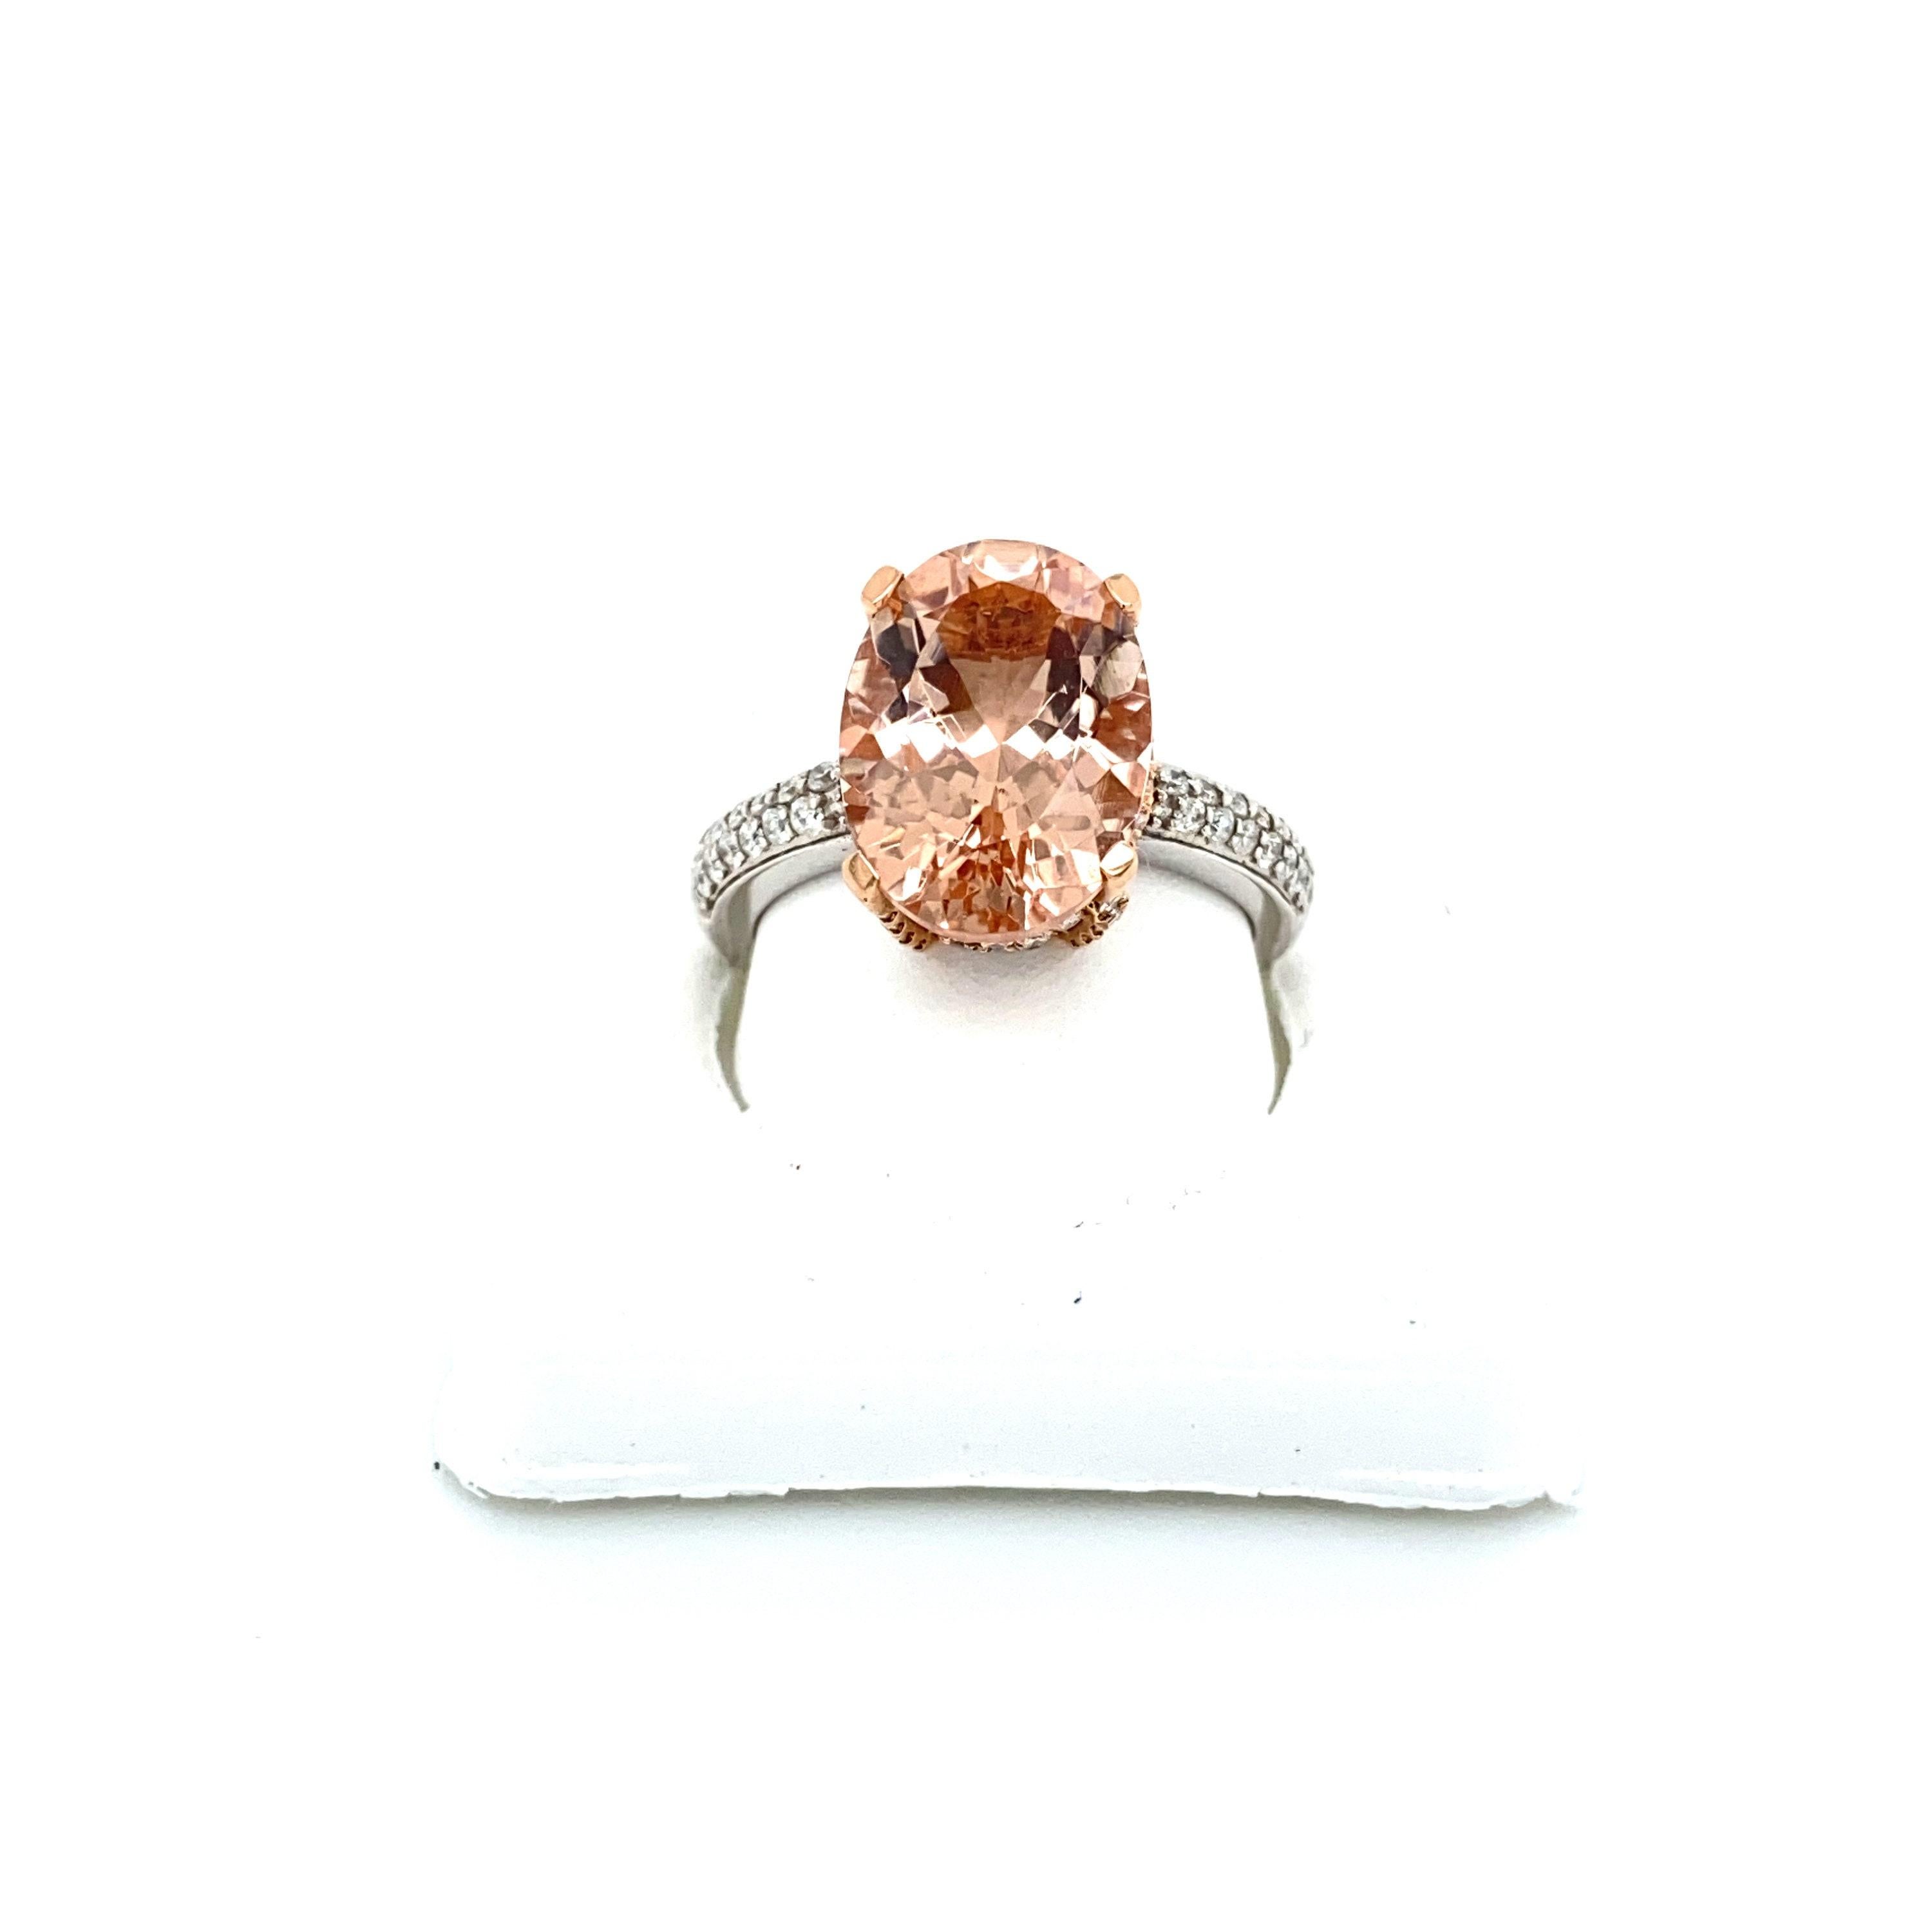 This is a magnificent natural morganite and diamond ring set in solid 14K white gold. The natural 5.51 Ct Morganite oval has an excellent peachy pink color (5.51 carats of AAA quality gem) and is set on top of a gorgeous diamond encrusted shank. The